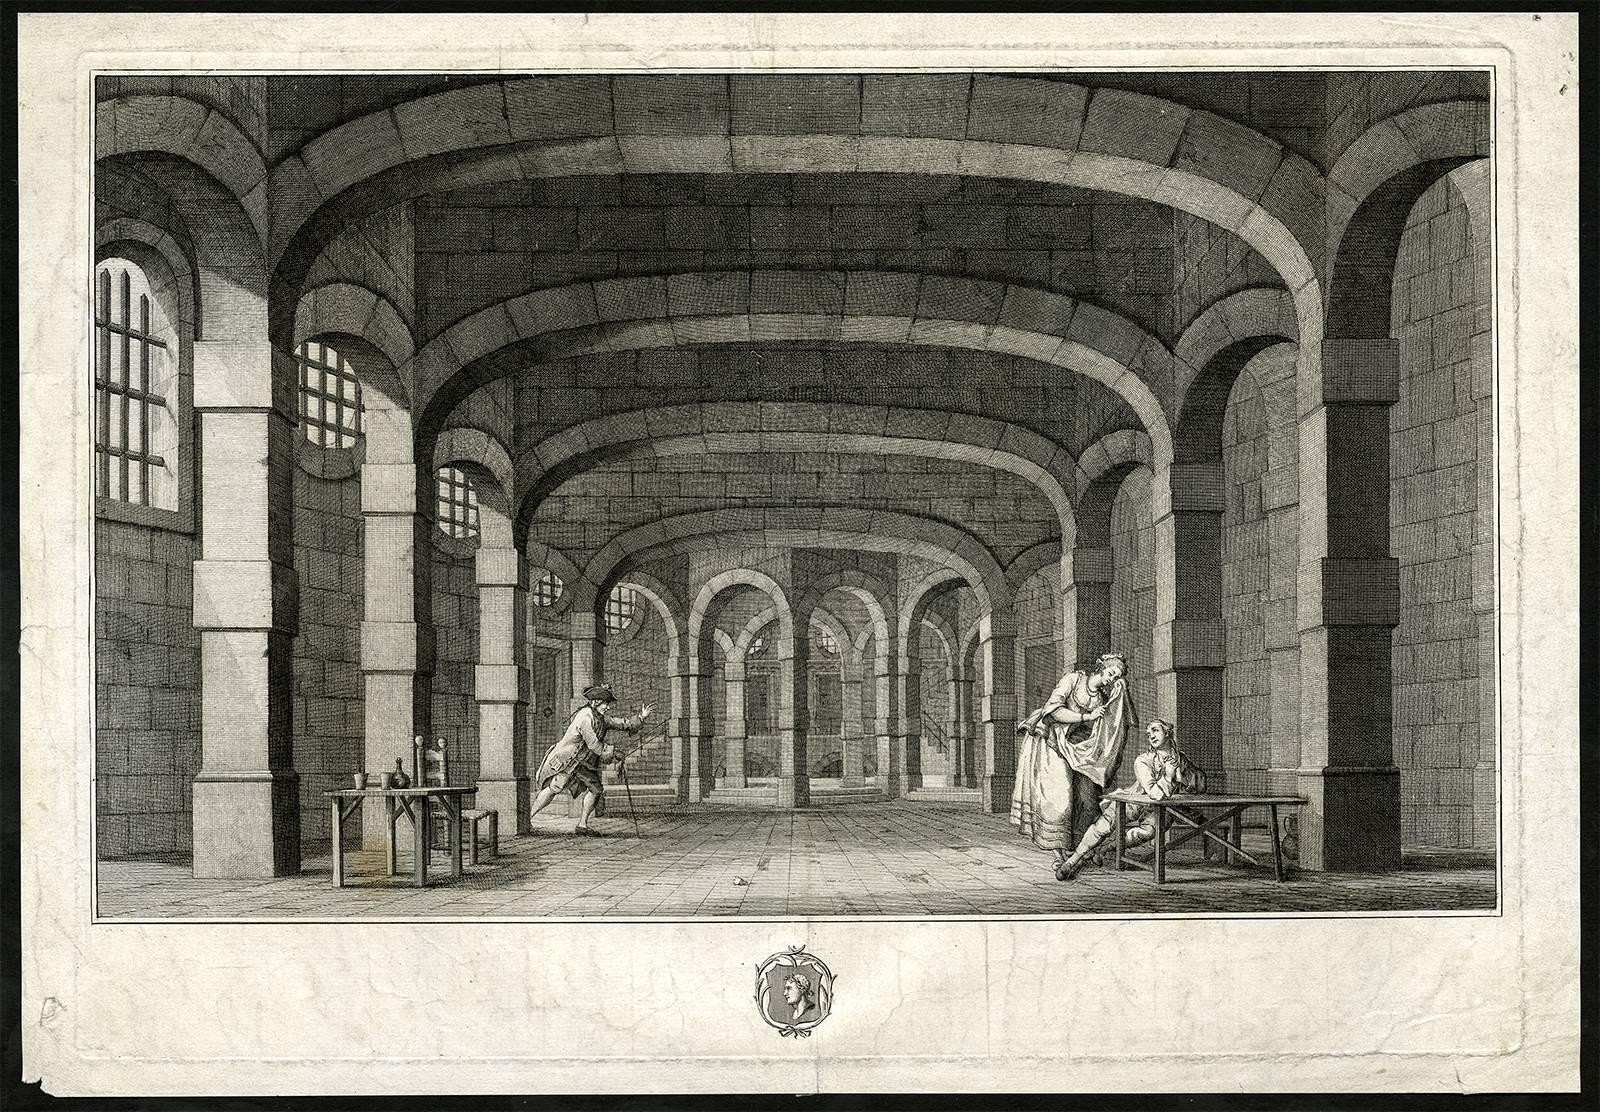 Unknown Figurative Print - Untitled - A scene in the vaulted catacombs of a castle, probably a jail.